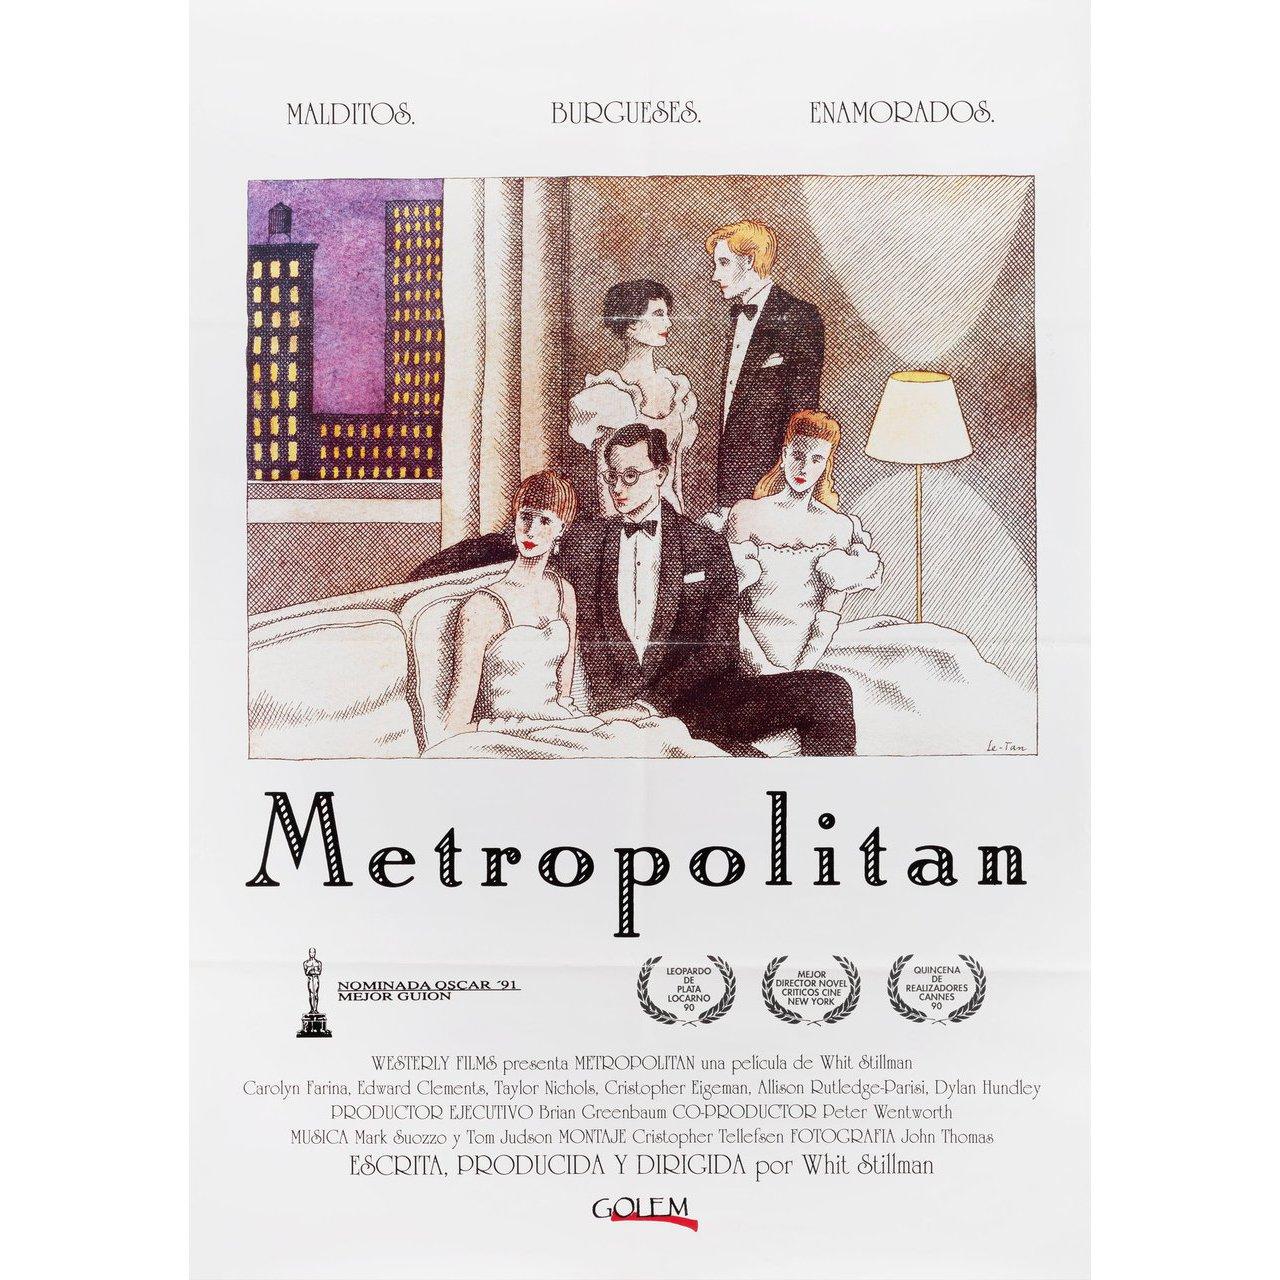 Original 1990 Spanish B1 poster by Pierre Le-Tan for the film Metropolitan directed by Whit Stillman with Carolyn Farina / Edward Clements / Chris Eigeman / Taylor Nichols. Very Good-Fine condition, folded. Many original posters were issued folded